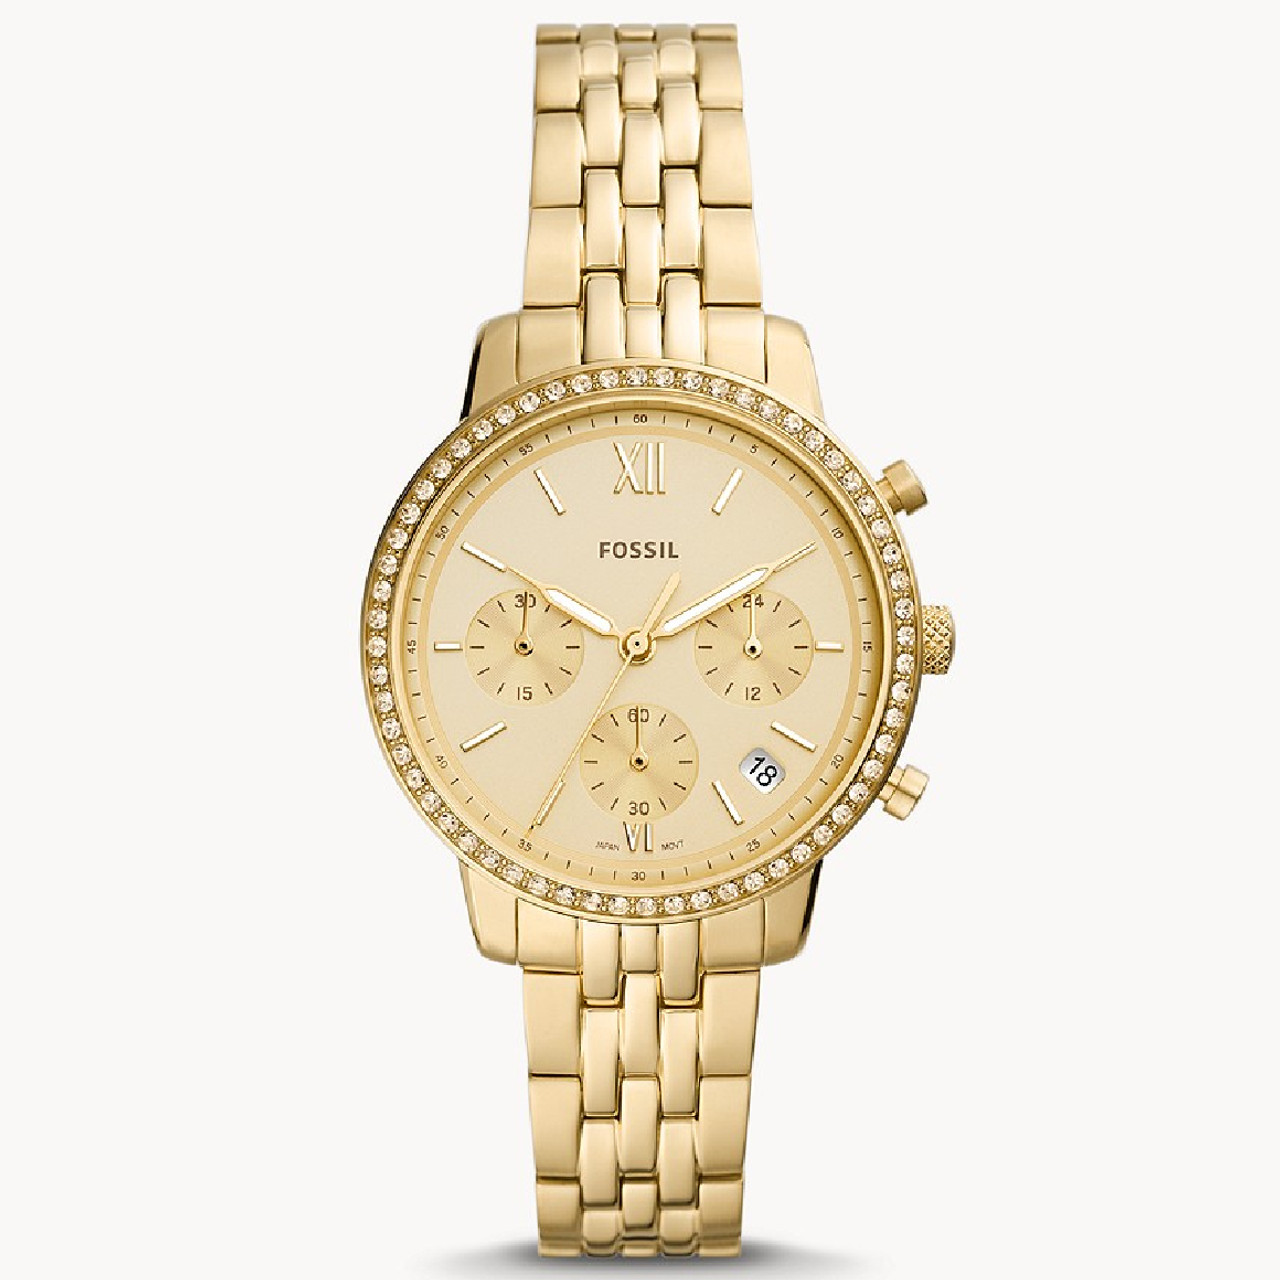 Fossil Women Pink Embellished Dial Ceramic Bracelet Style Straps Analogue  Watch CE1117 Price in India, Full Specifications & Offers | DTashion.com